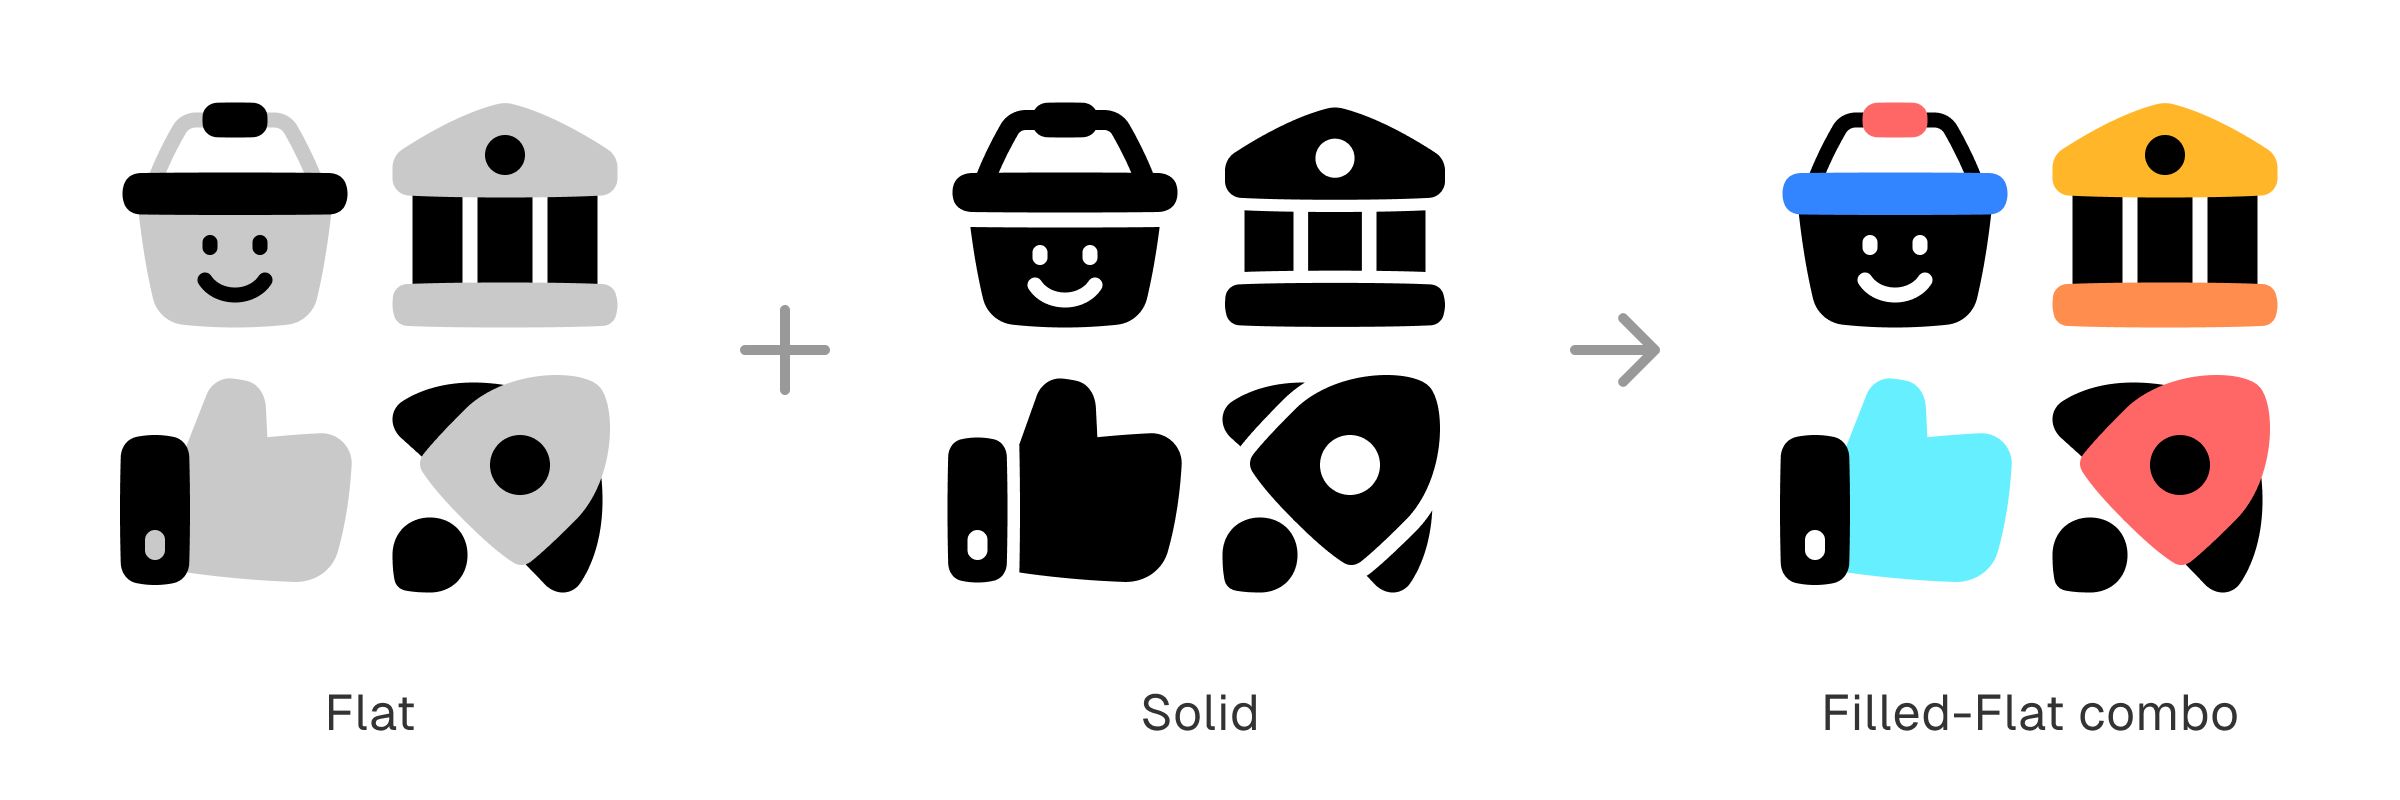 How to create unique icons styles, through the art of combination